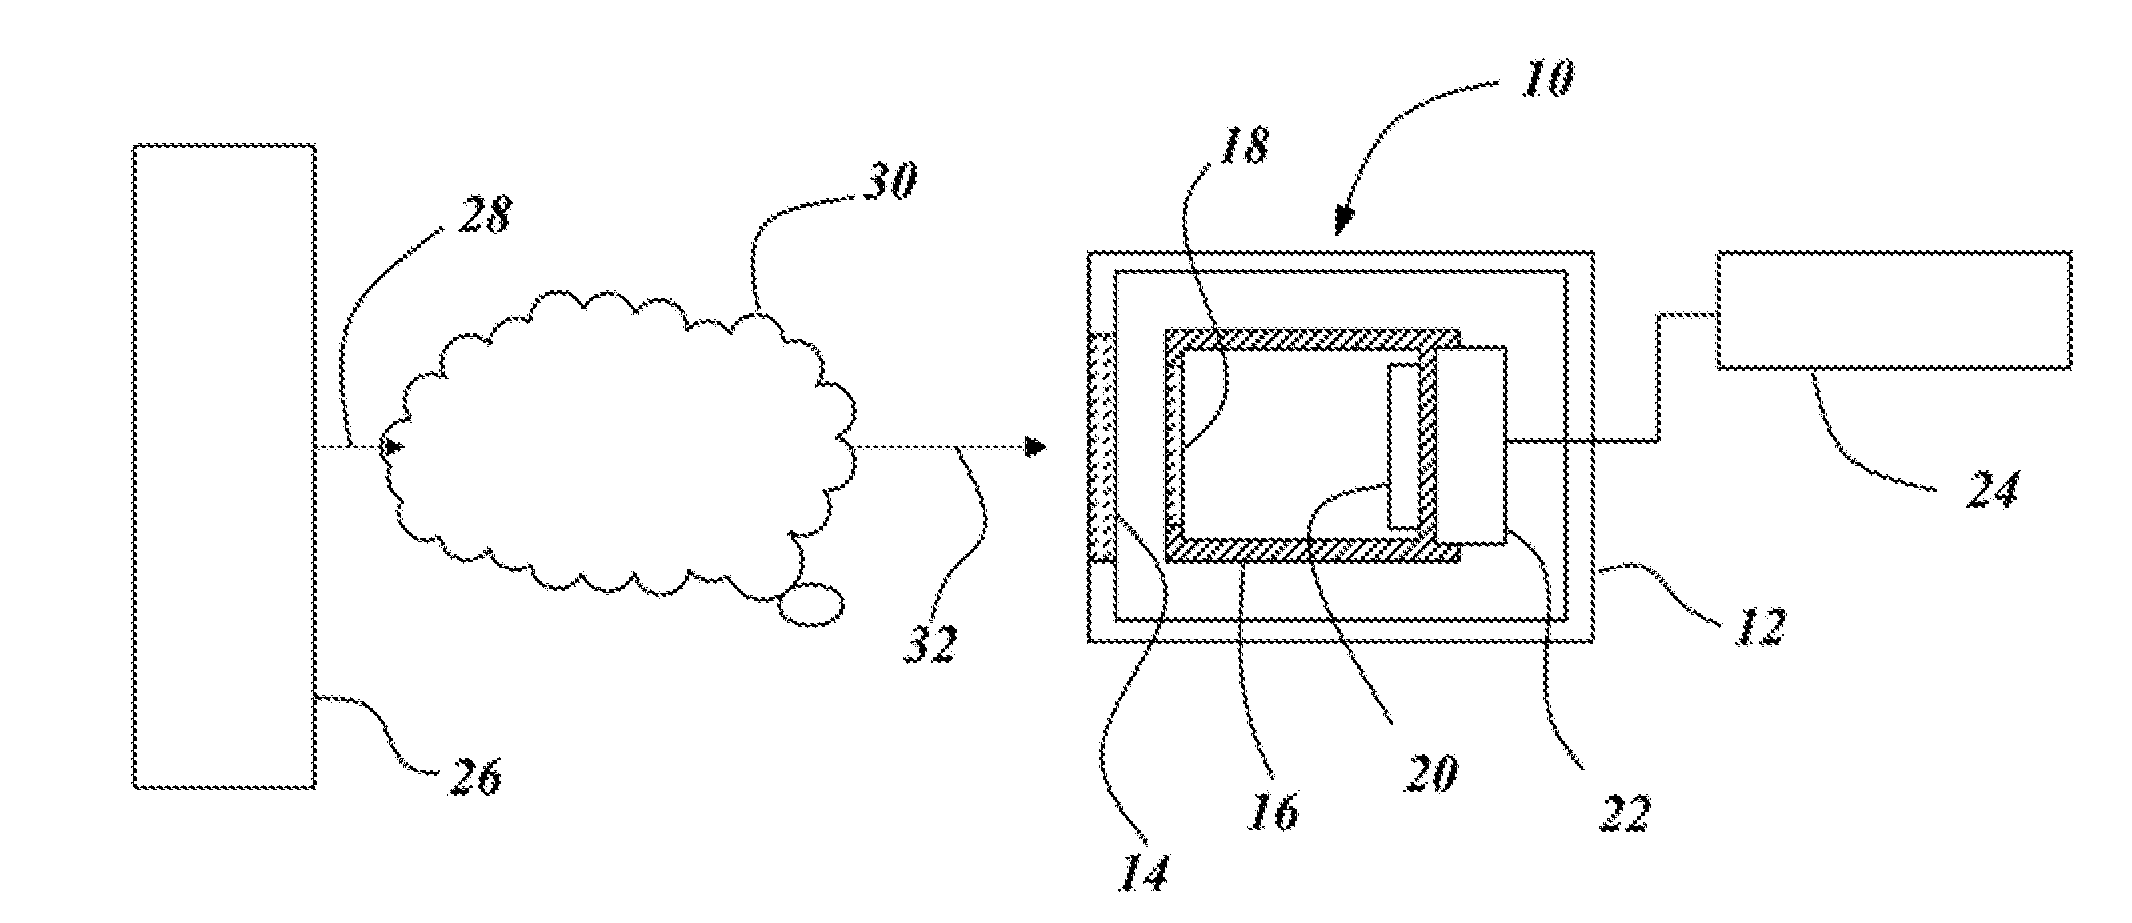 Uncooled Infrared Camera System for Detecting Chemical Leaks and Method for Making the Same